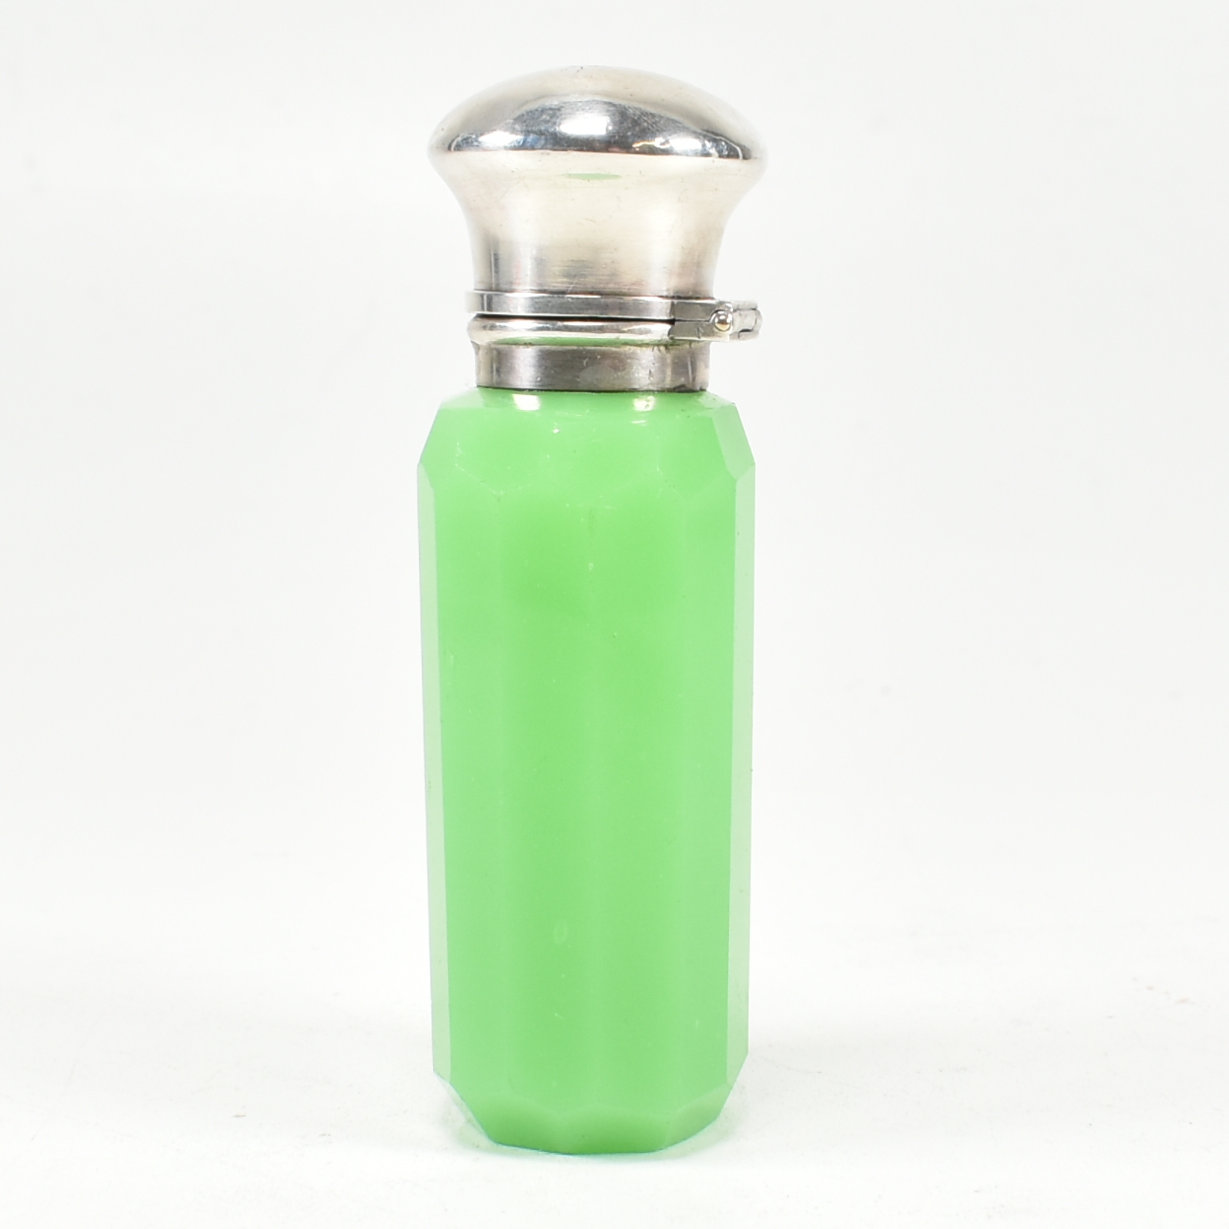 EARLY 20TH CENTURY WHITE METAL & URANIUM GLASS SCENT BOTTLE - Image 4 of 9